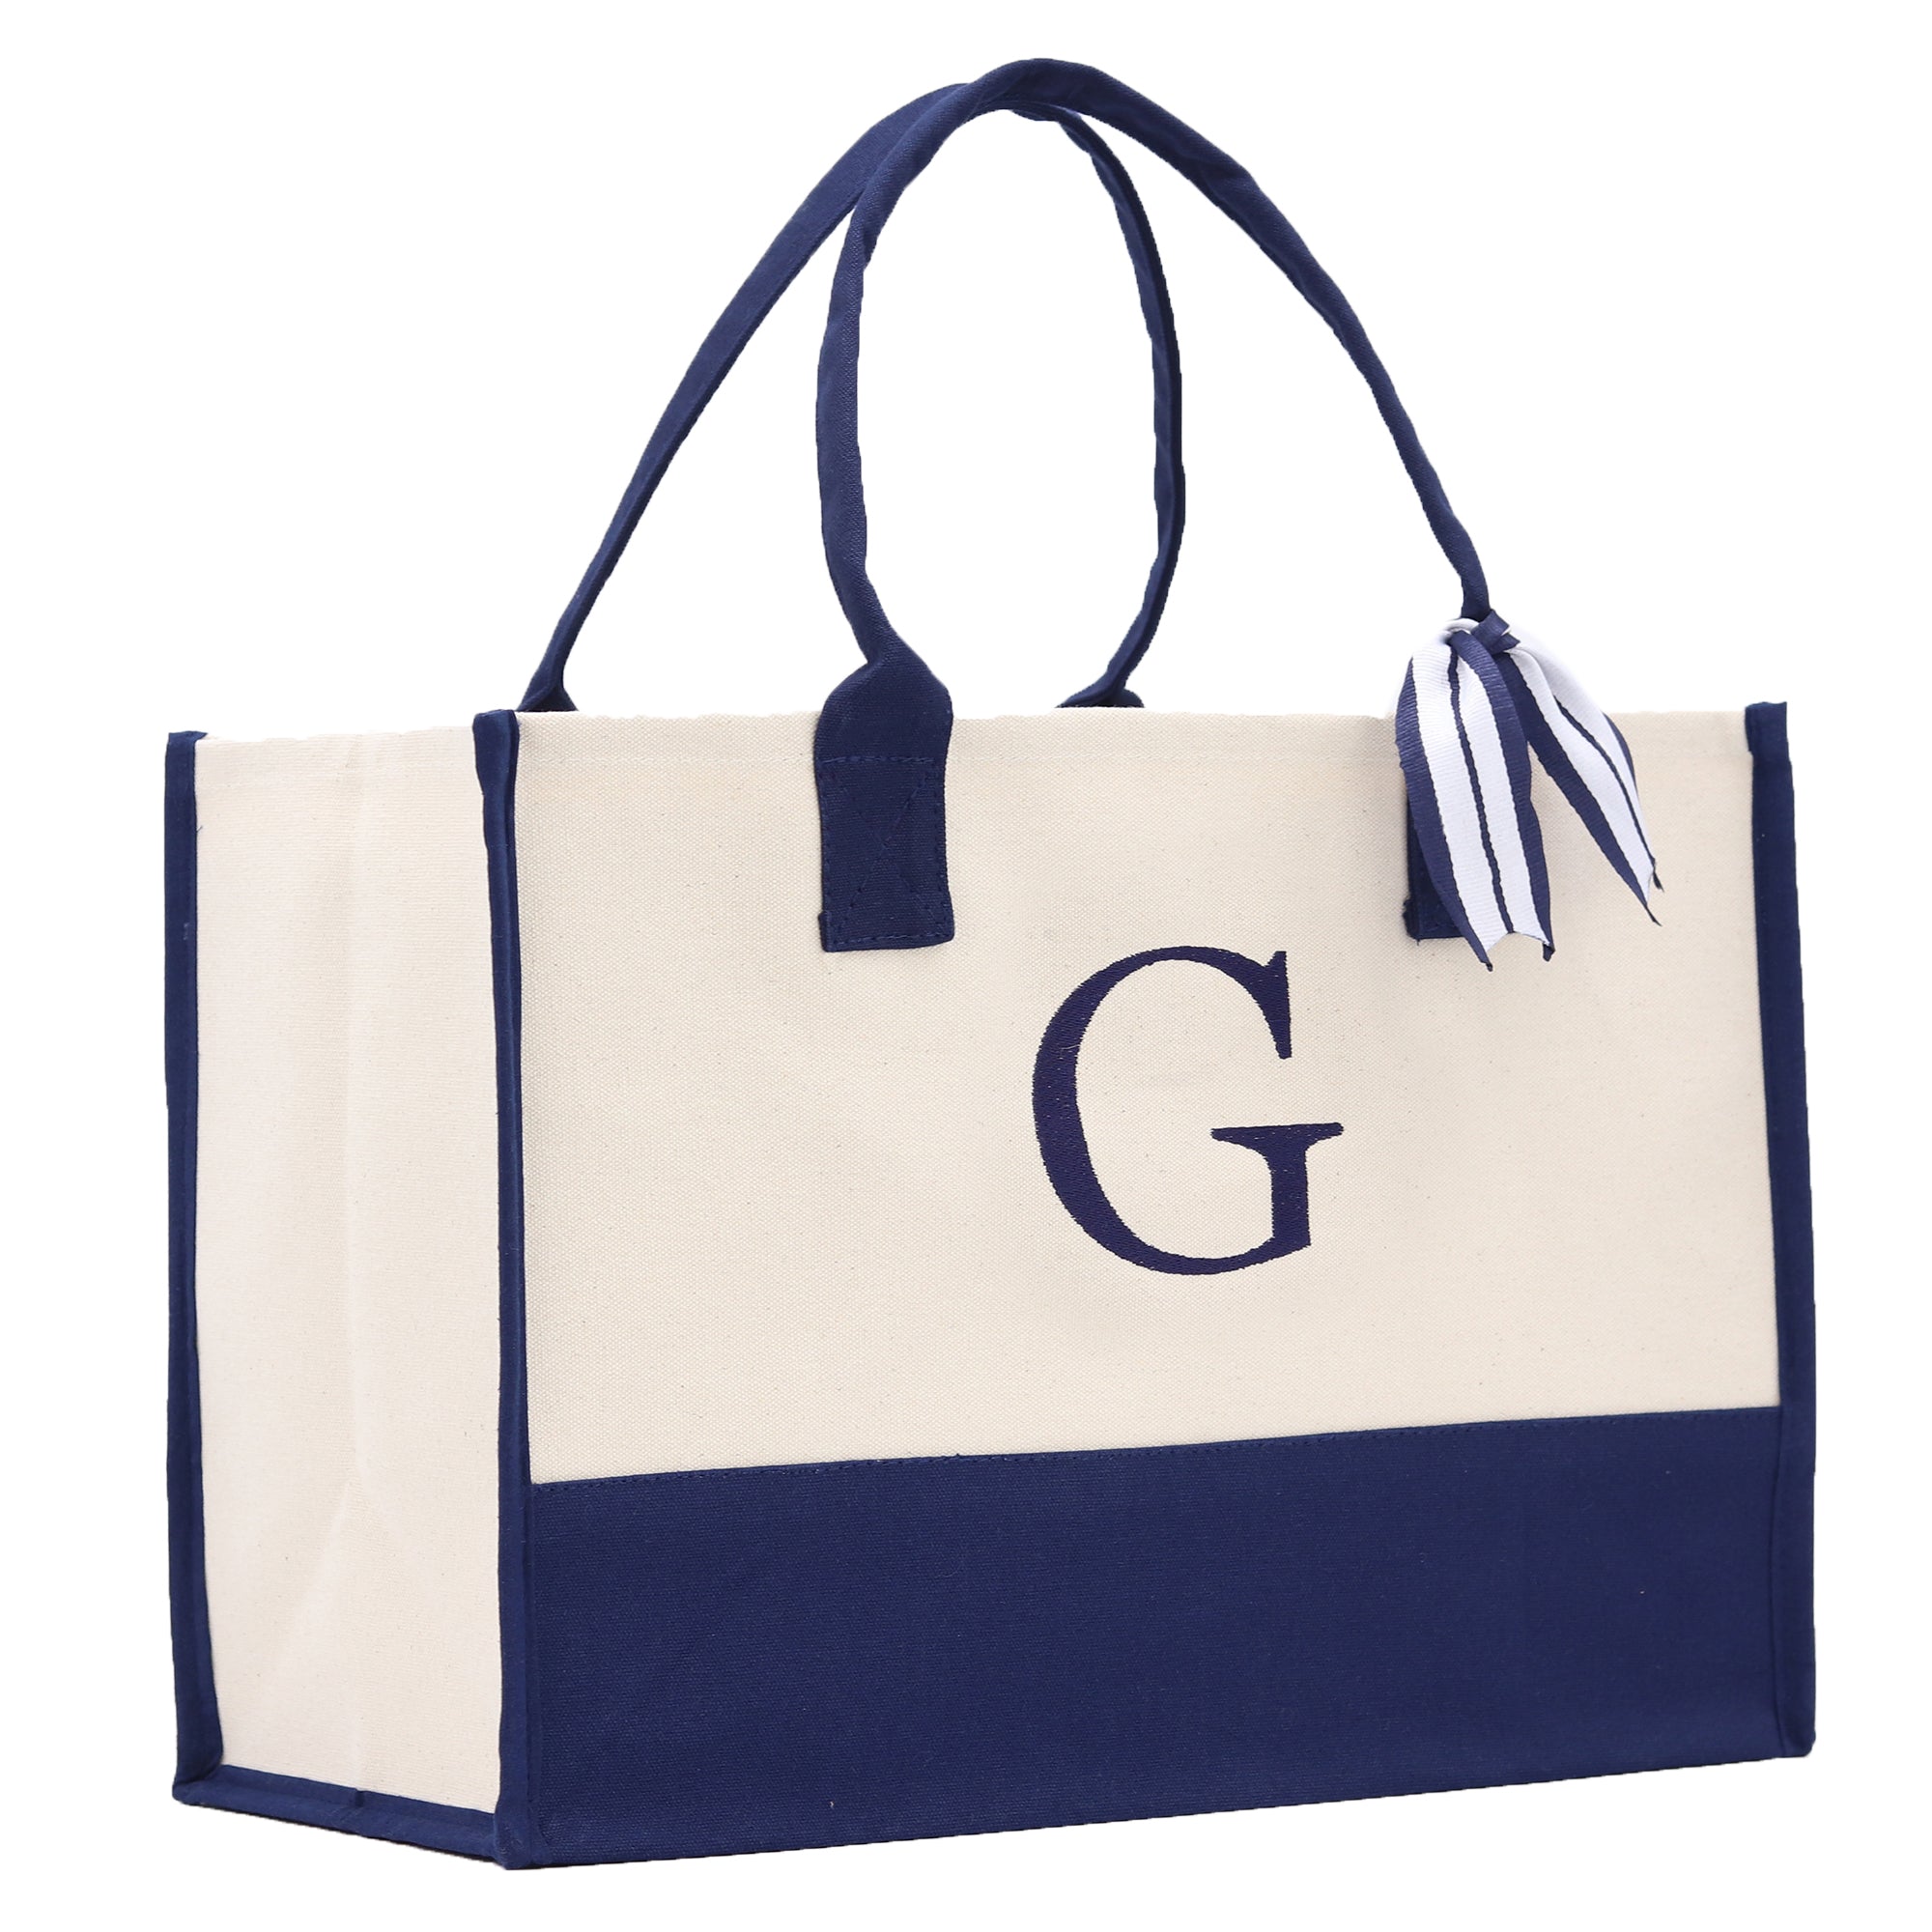 Monogram Tote Bag with 100% Cotton Canvas and a Chic Personalized Monogram Navy Blue Vanessa Rosella Block G 